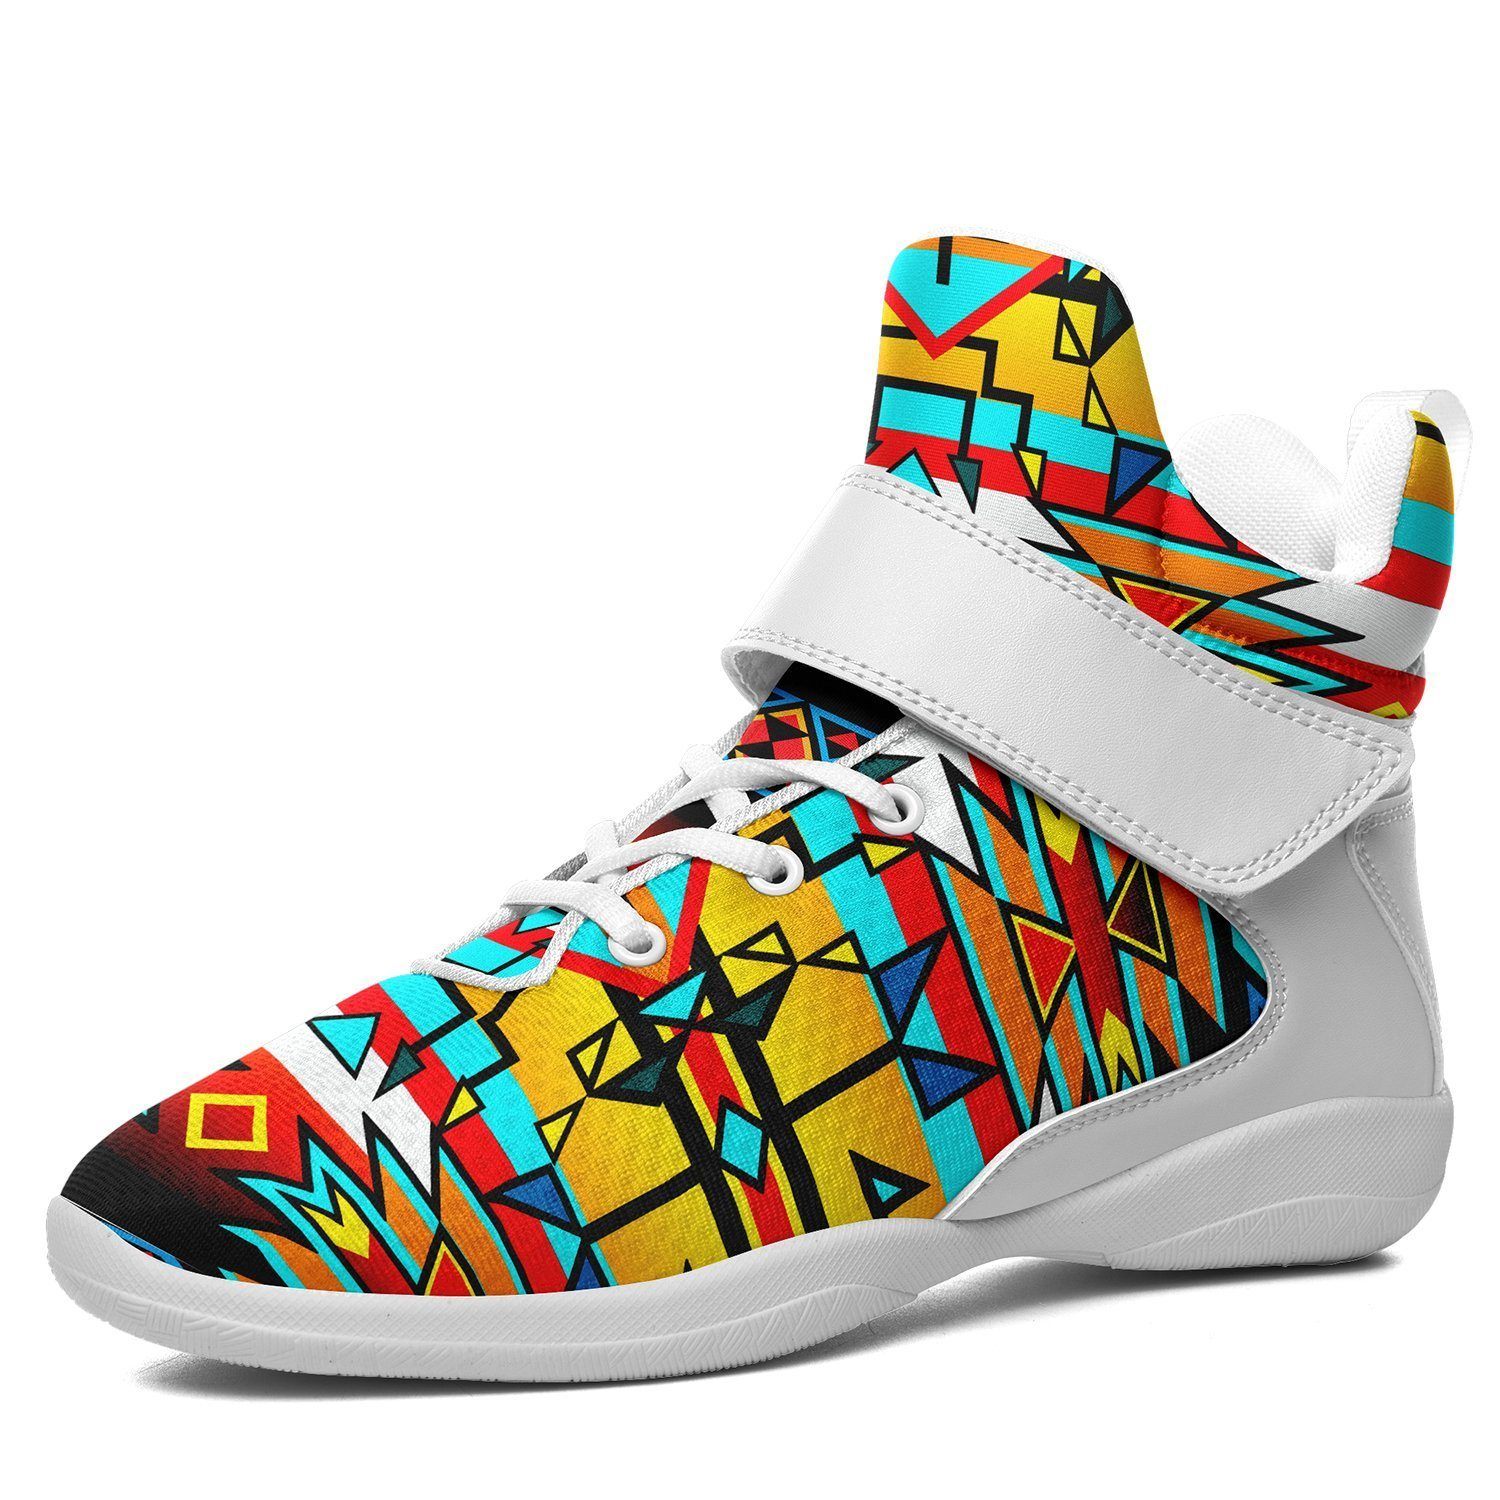 Force of Nature Twister Ipottaa Basketball / Sport High Top Shoes - White Sole 49 Dzine US Men 7 / EUR 40 White Sole with White Strap 